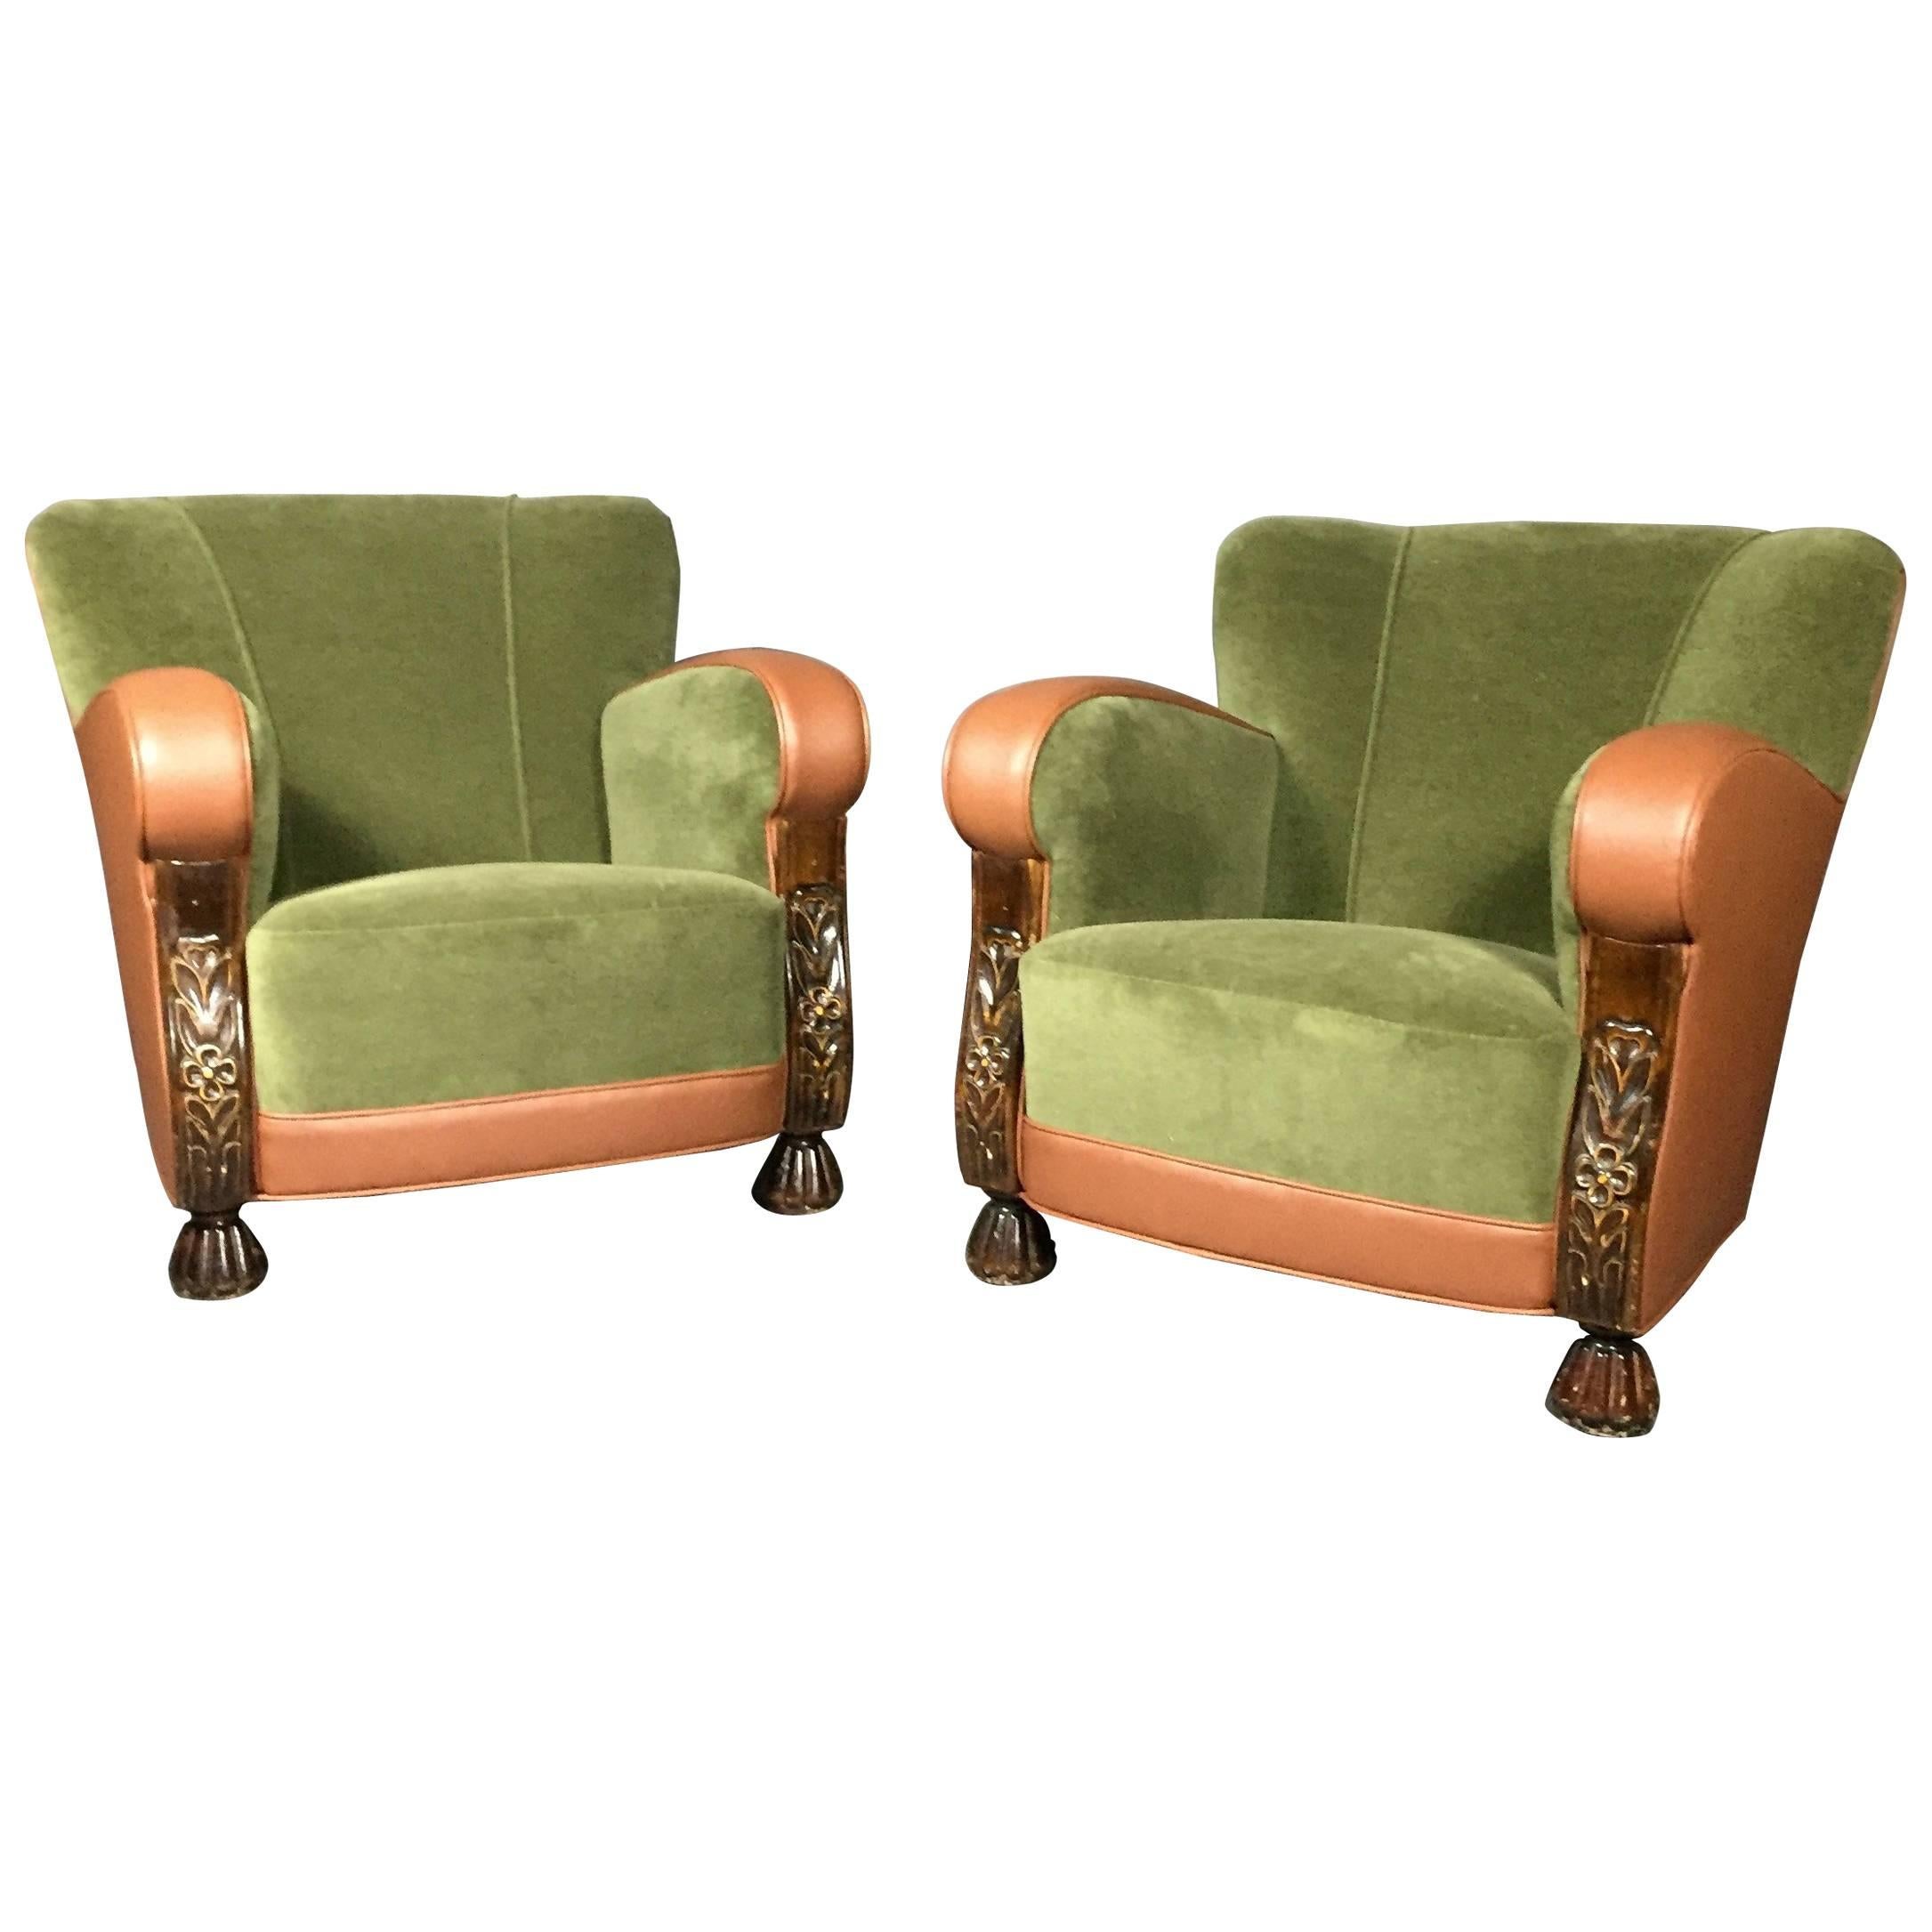 Pair of Belgian 1930s Club Chairs, New Leather and Velvet Covers